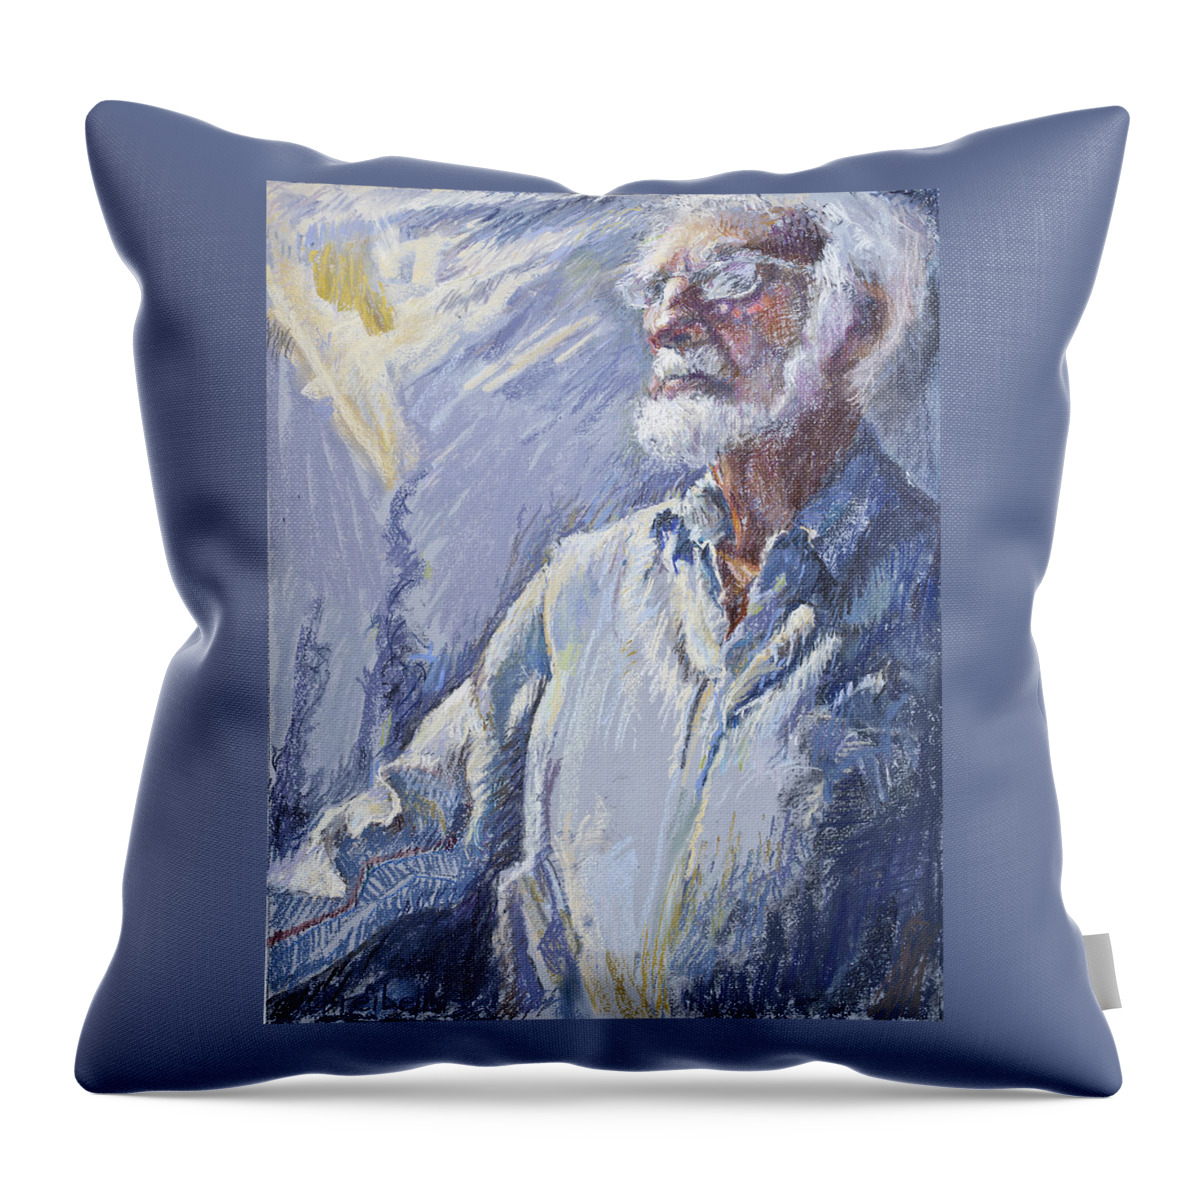 Man Throw Pillow featuring the painting Between Two Worlds by Ellen Dreibelbis